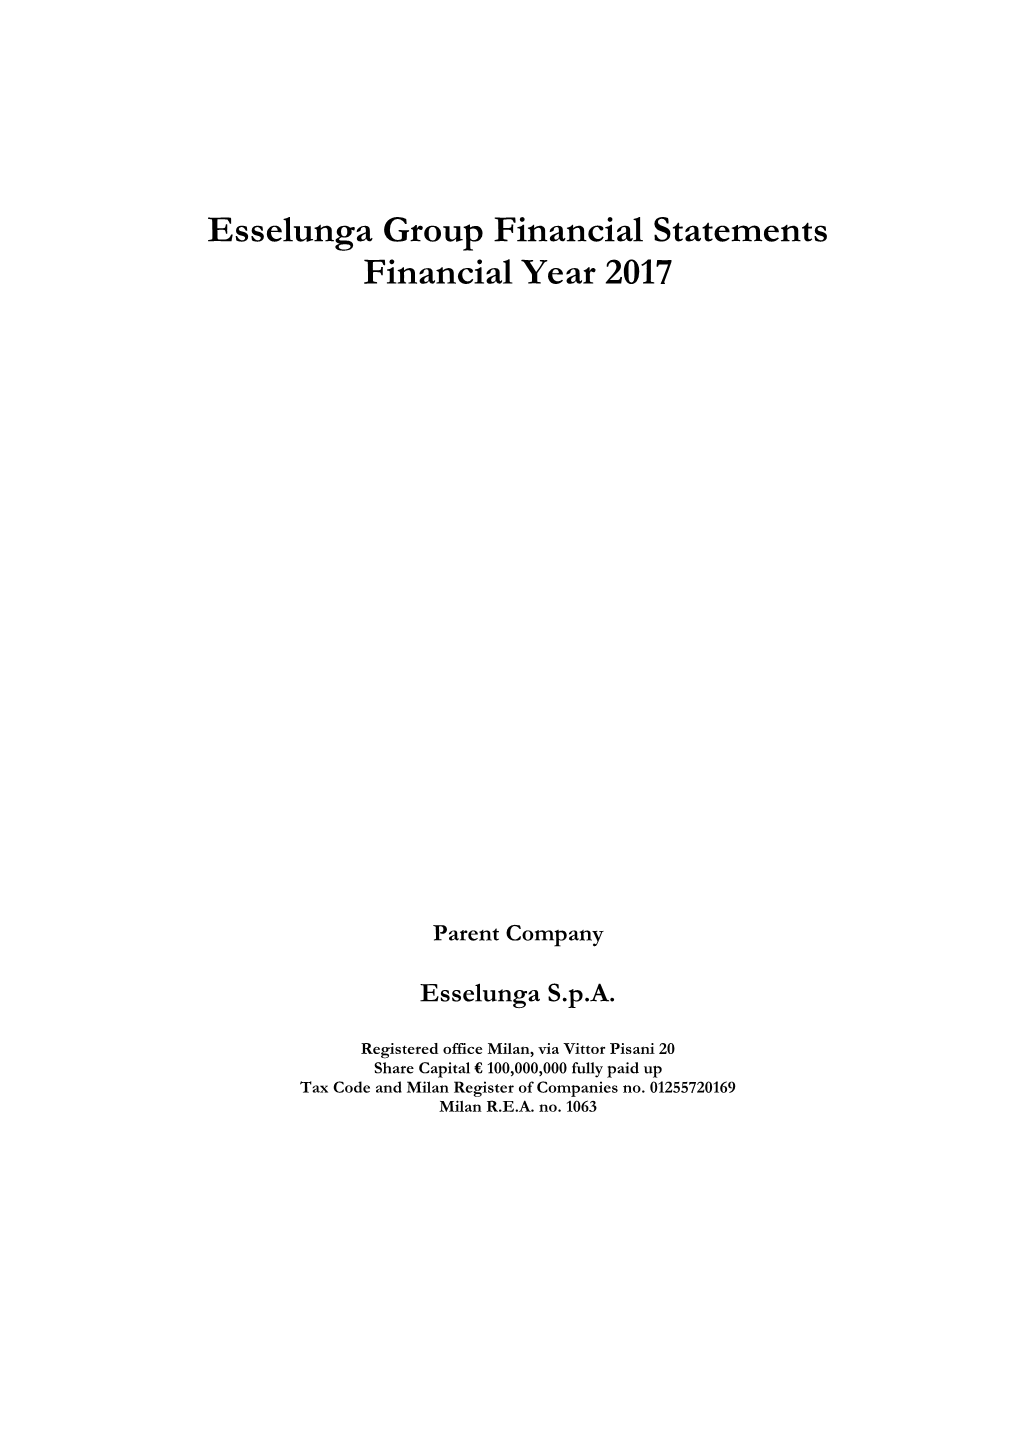 Esselunga Group Financial Statements Financial Year 2017